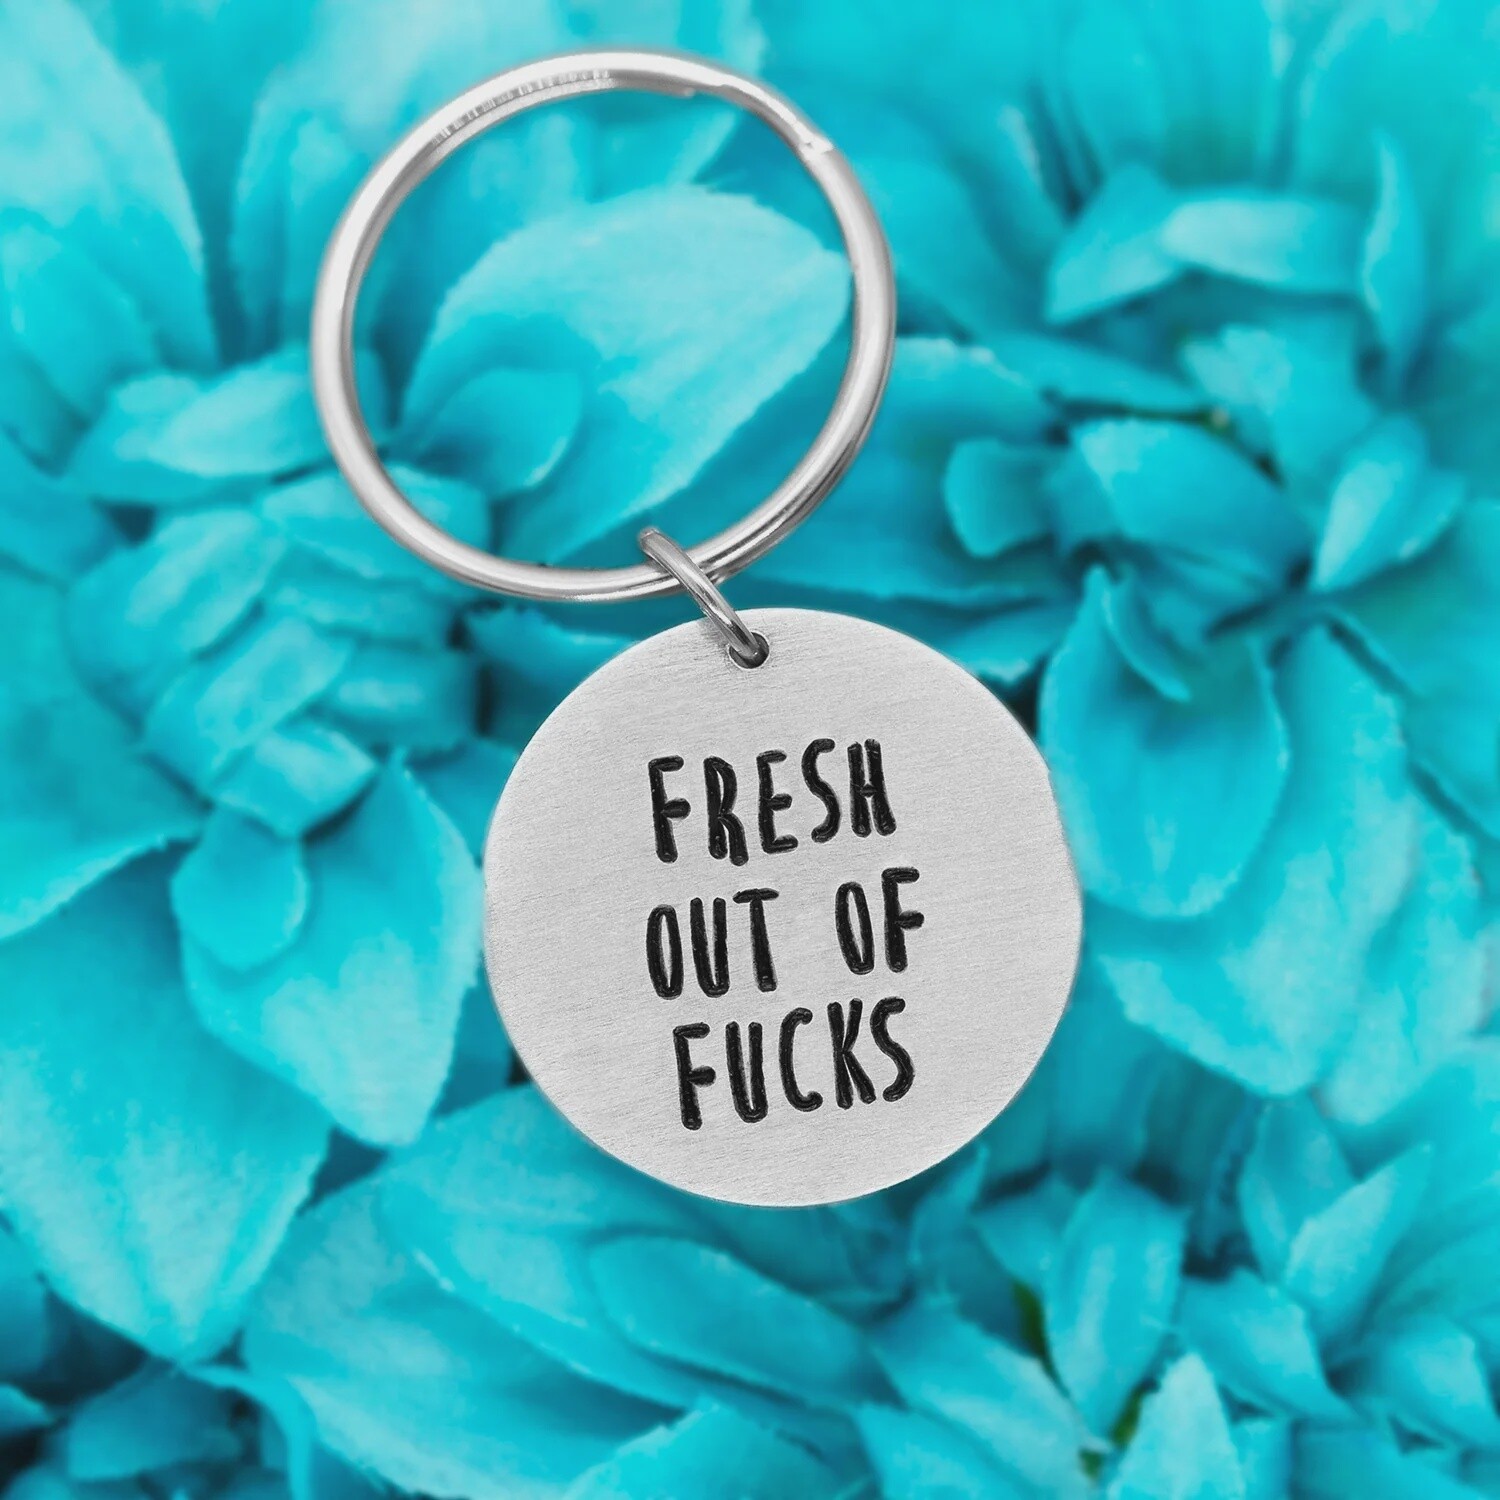 "Fresh out of fucks" Keychains